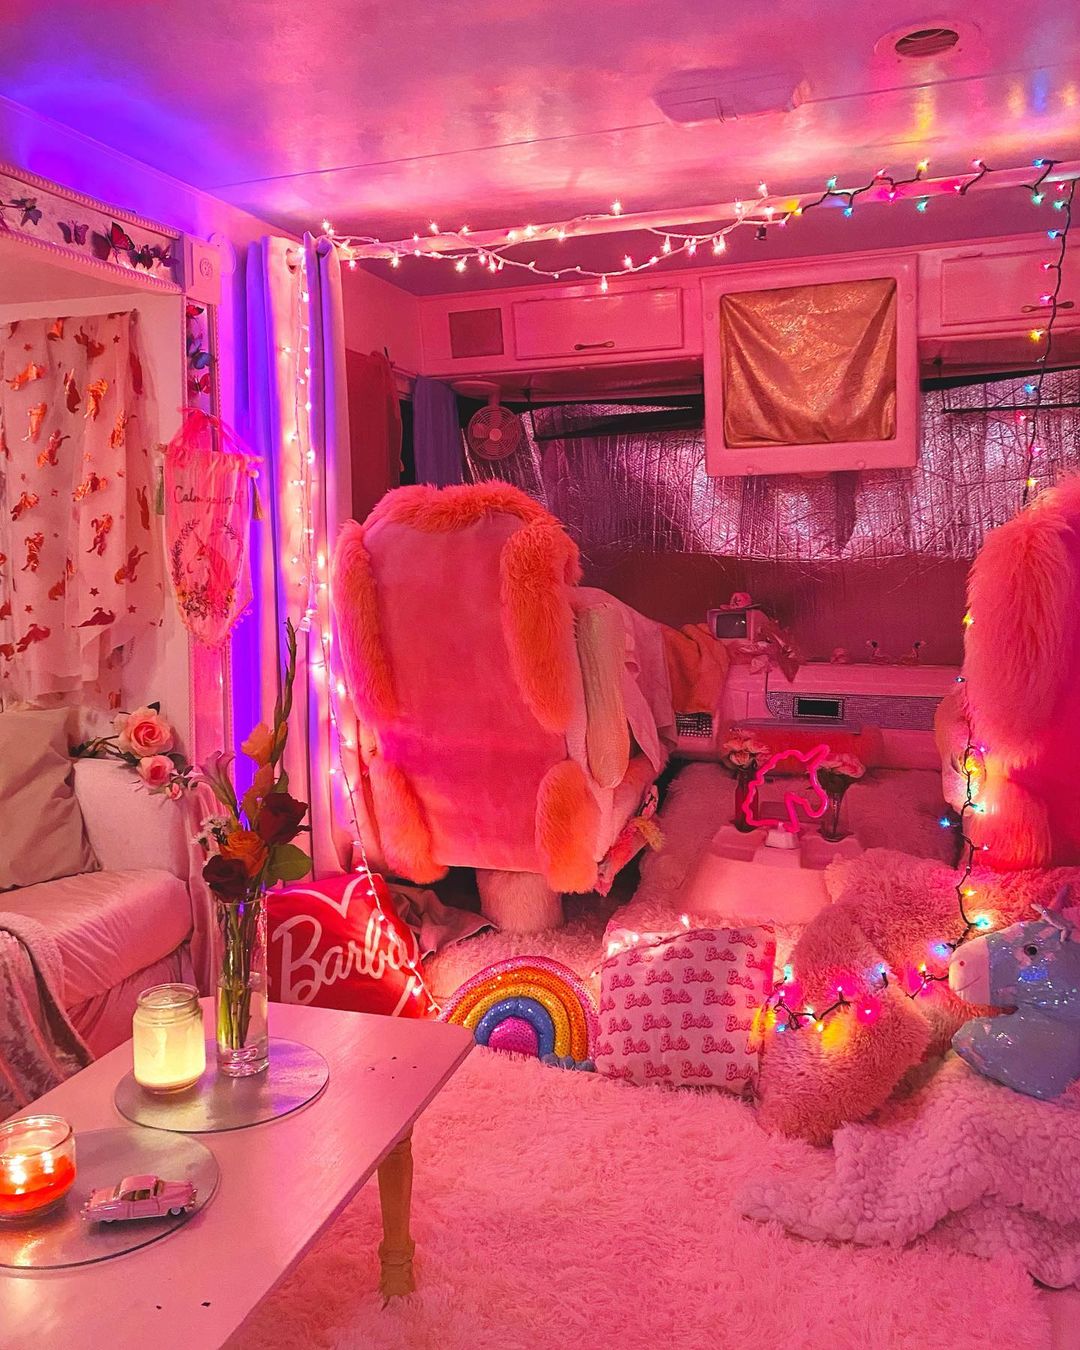 The Real Barbie RV Is an All-Pink Daybreak Motorhome, a Fabulous Dream ...